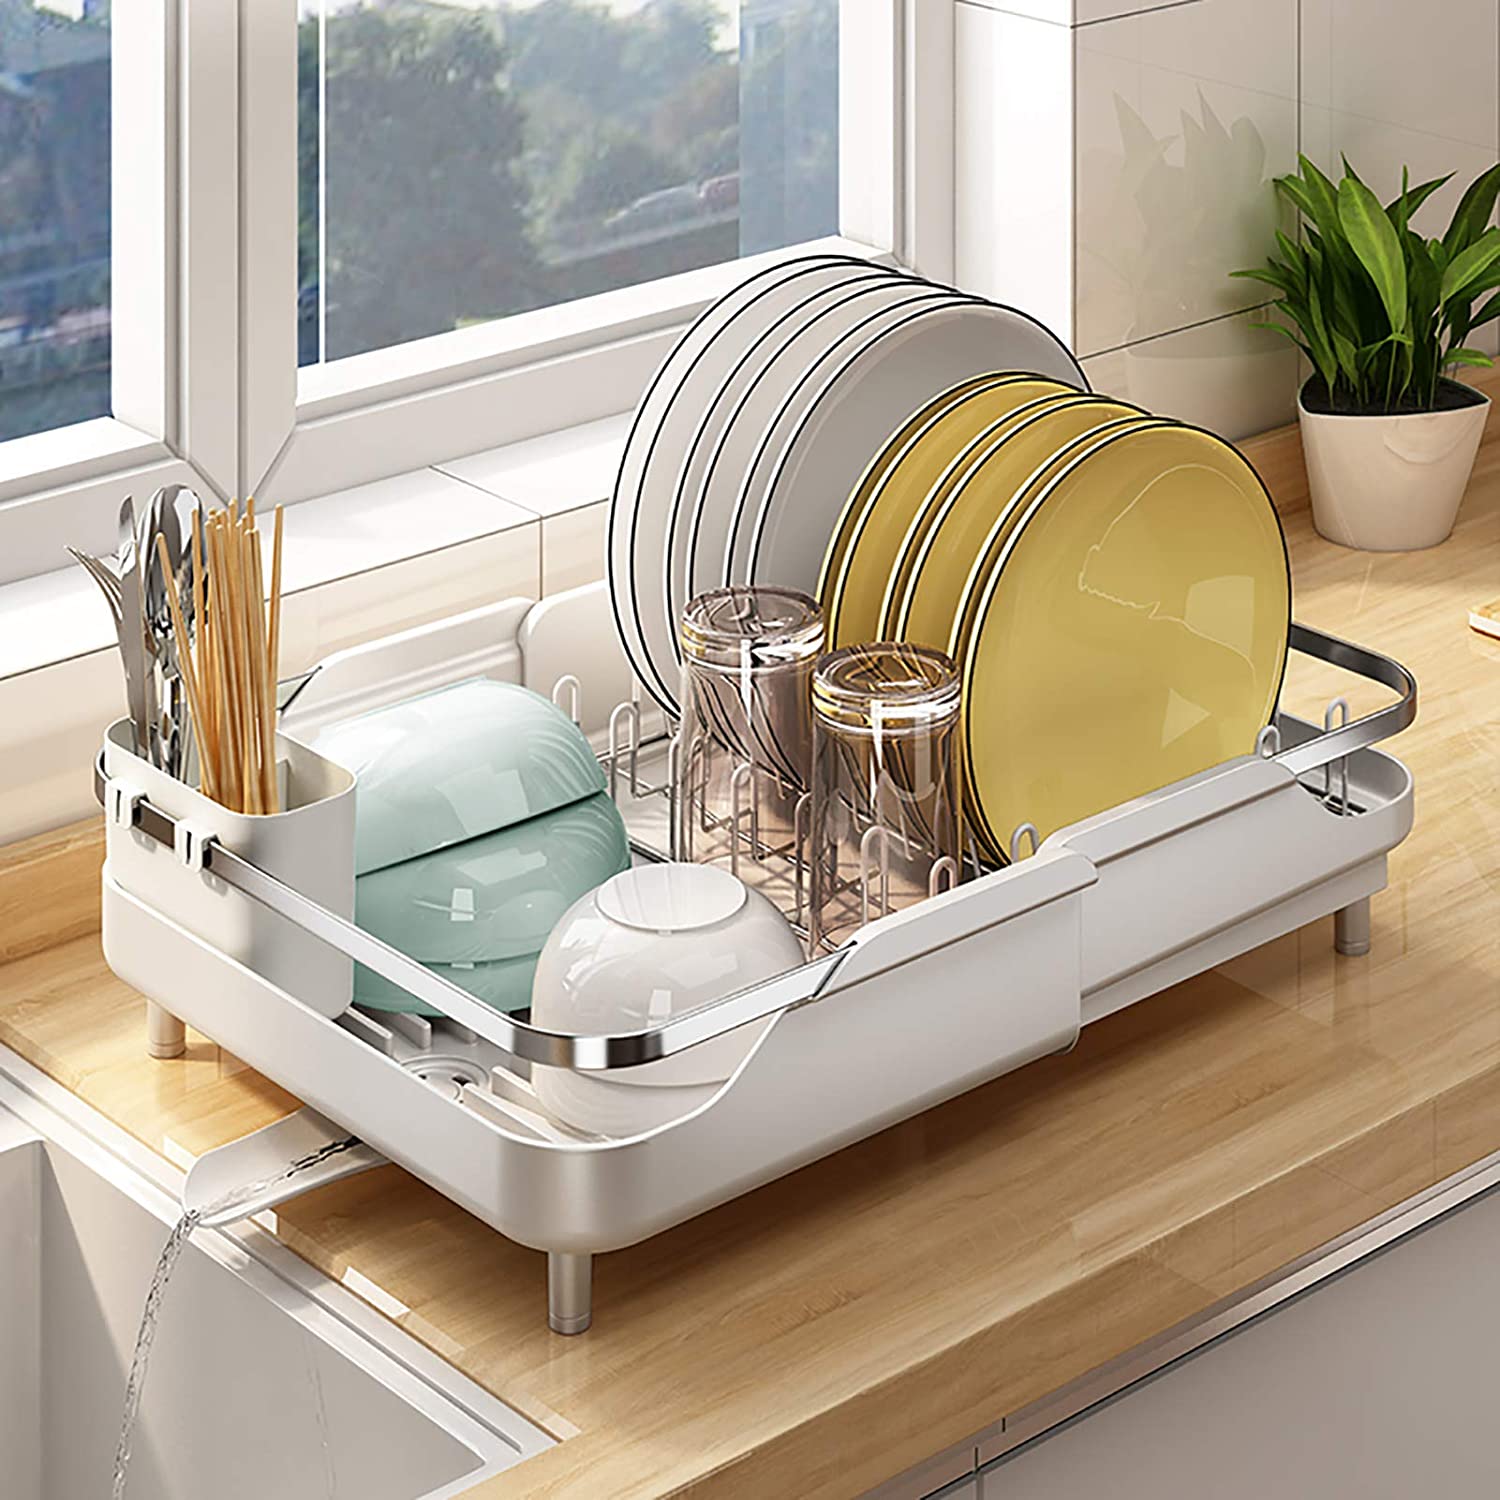 Dish Rack Drying Stainless Steel Kitchen Drainer Sink Expandable(11.5"-19.3") ink Dish Drainer with Cup Holder Utensil Holder for Kitchen Counter